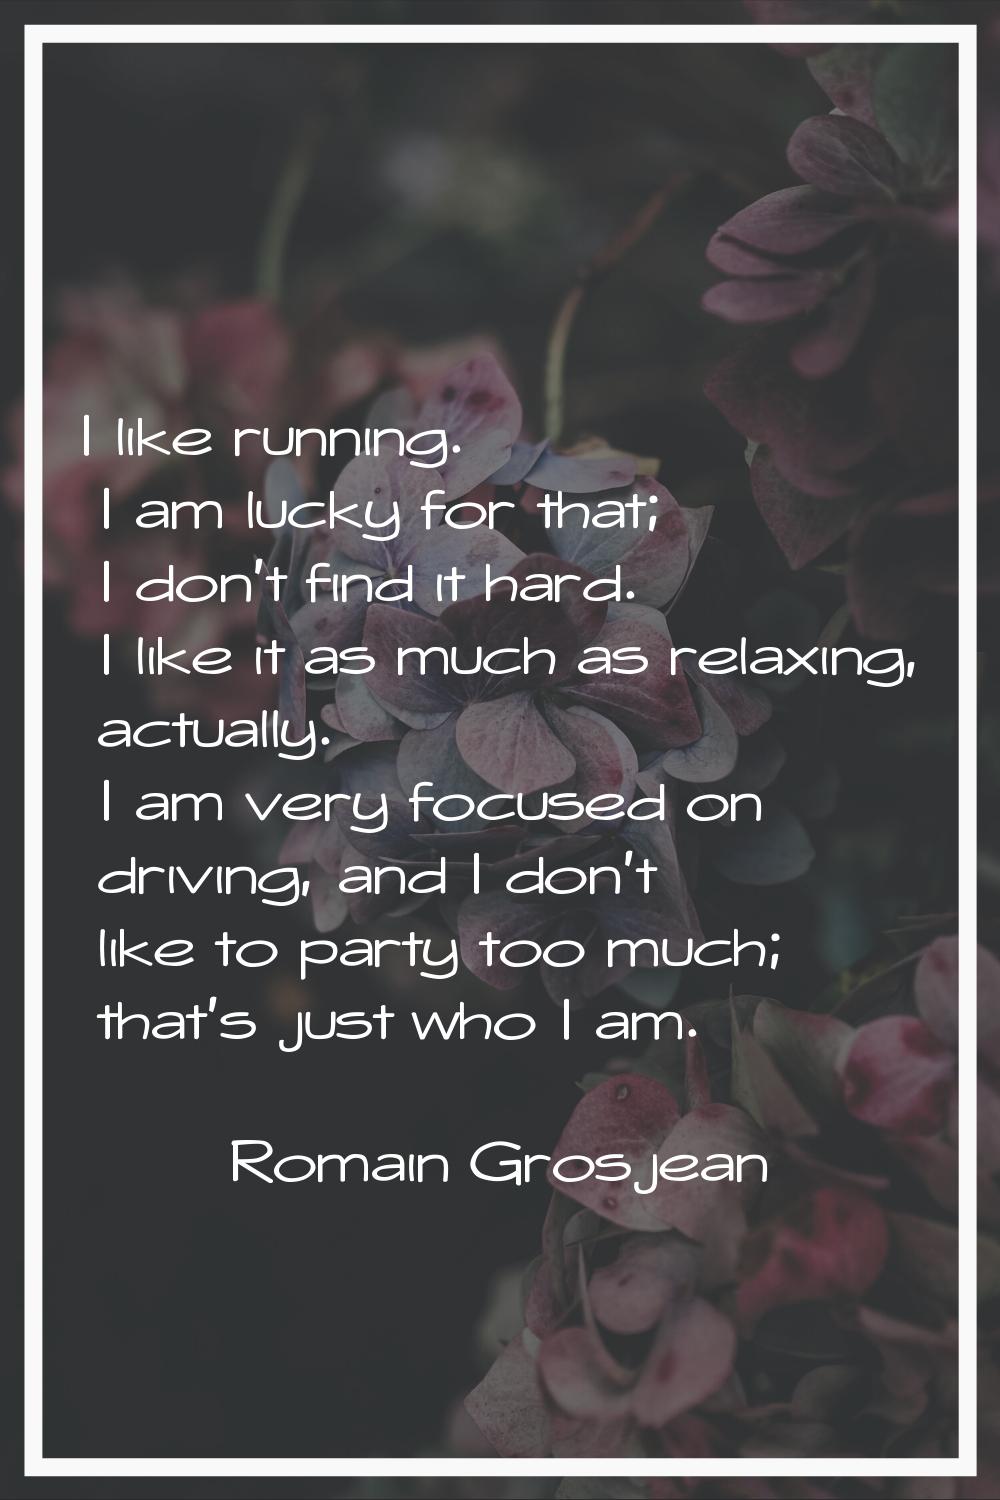 I like running. I am lucky for that; I don't find it hard. I like it as much as relaxing, actually.